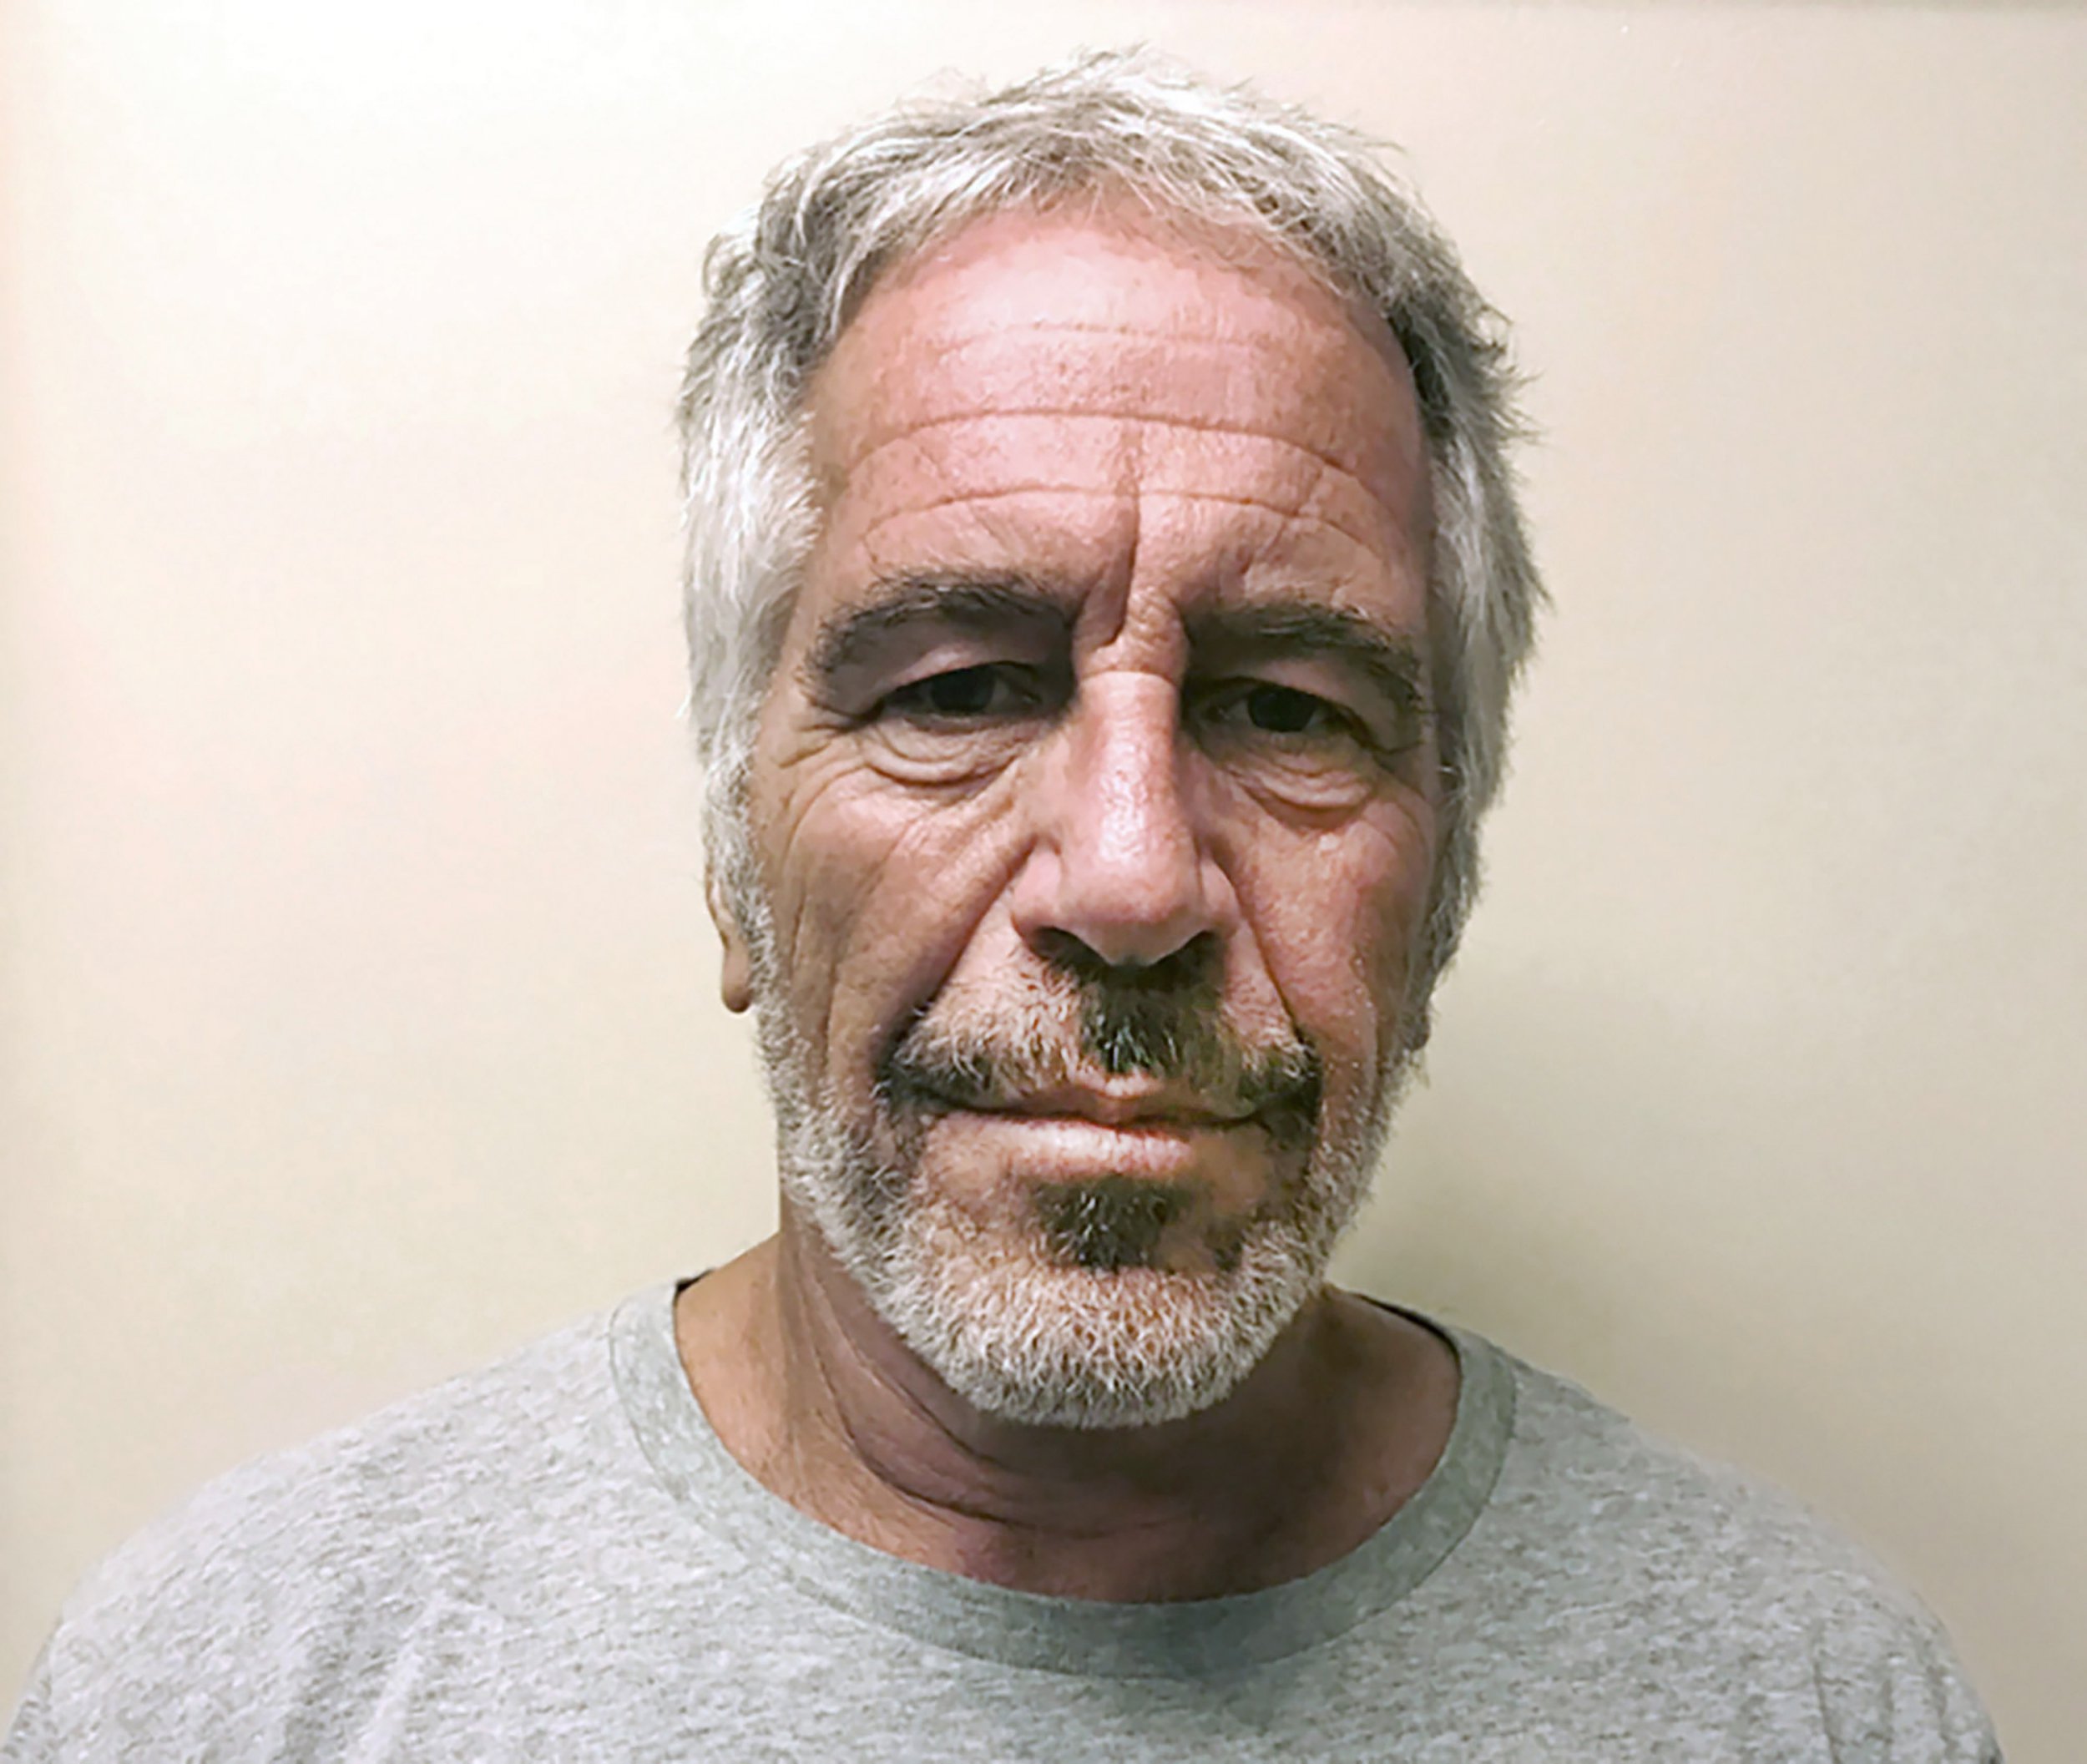 Secret Jeffrey Epstein transcripts are finally released 16 years after disgraced financier made controversial plea deal